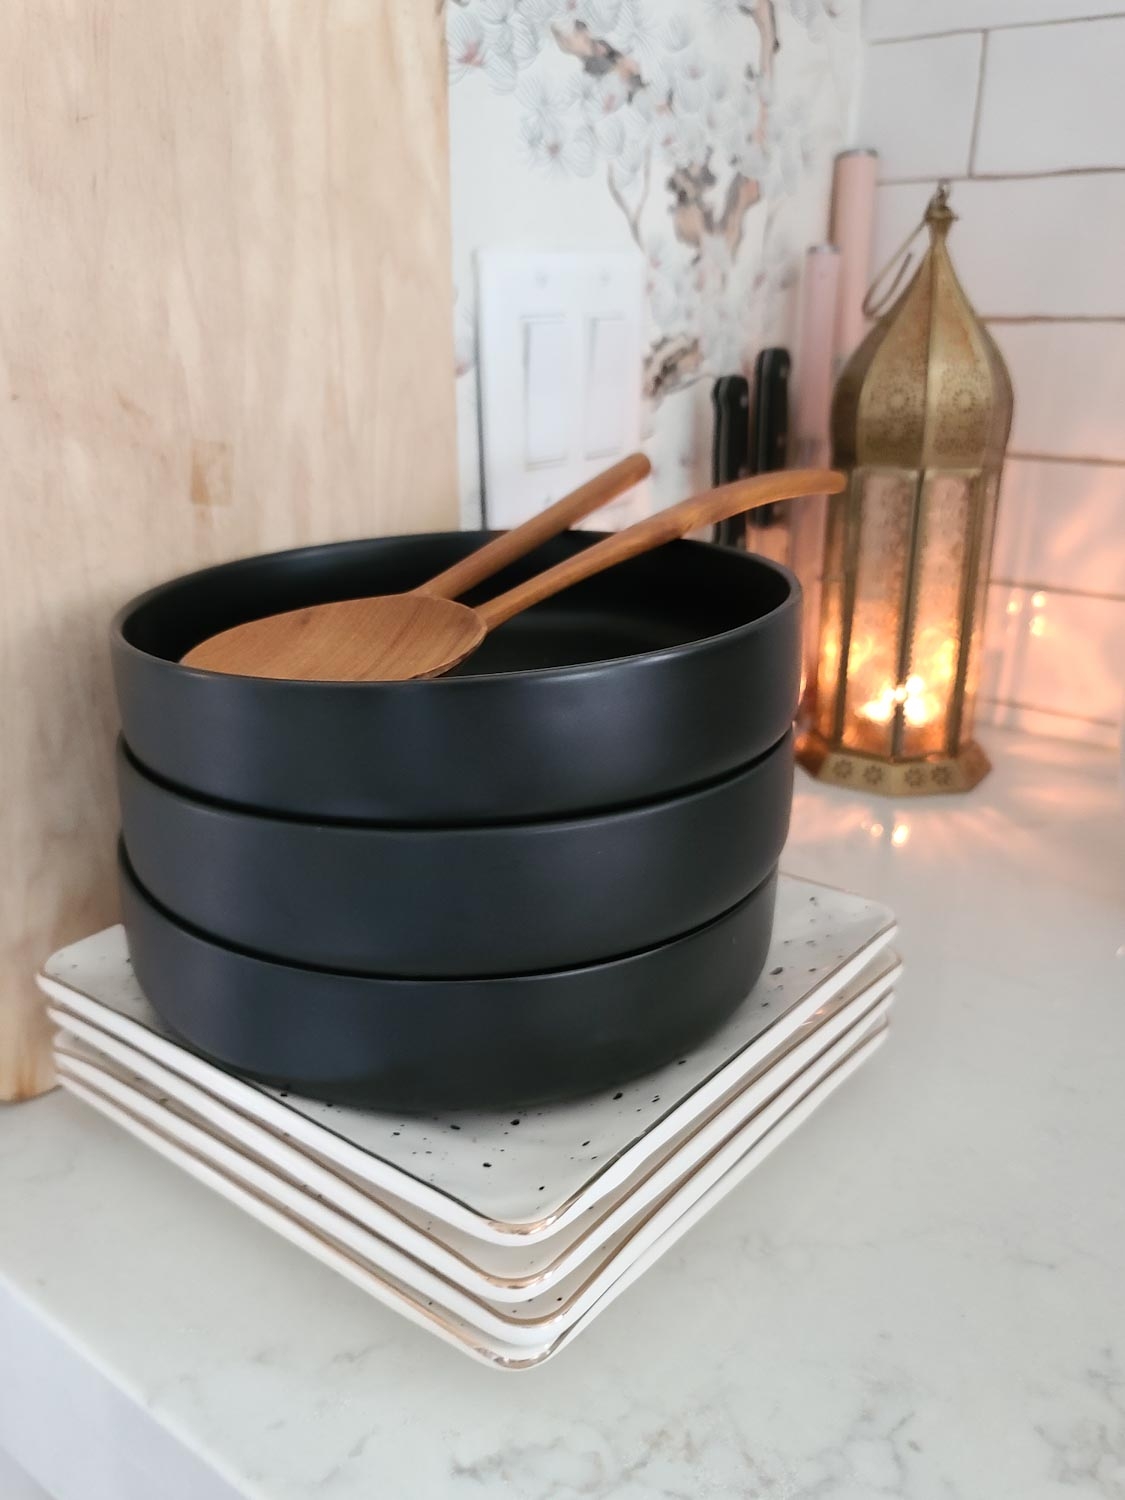 At Home Shopping Fall Winter Cozy Seasonal Decor Kitchen Office Modern Scandinavian Holiday Boho Eclectic Style Refresh Black White Decor Faux Fur Baskets Metal Side Table Velvet Chair candles vintage mirror hygge design 